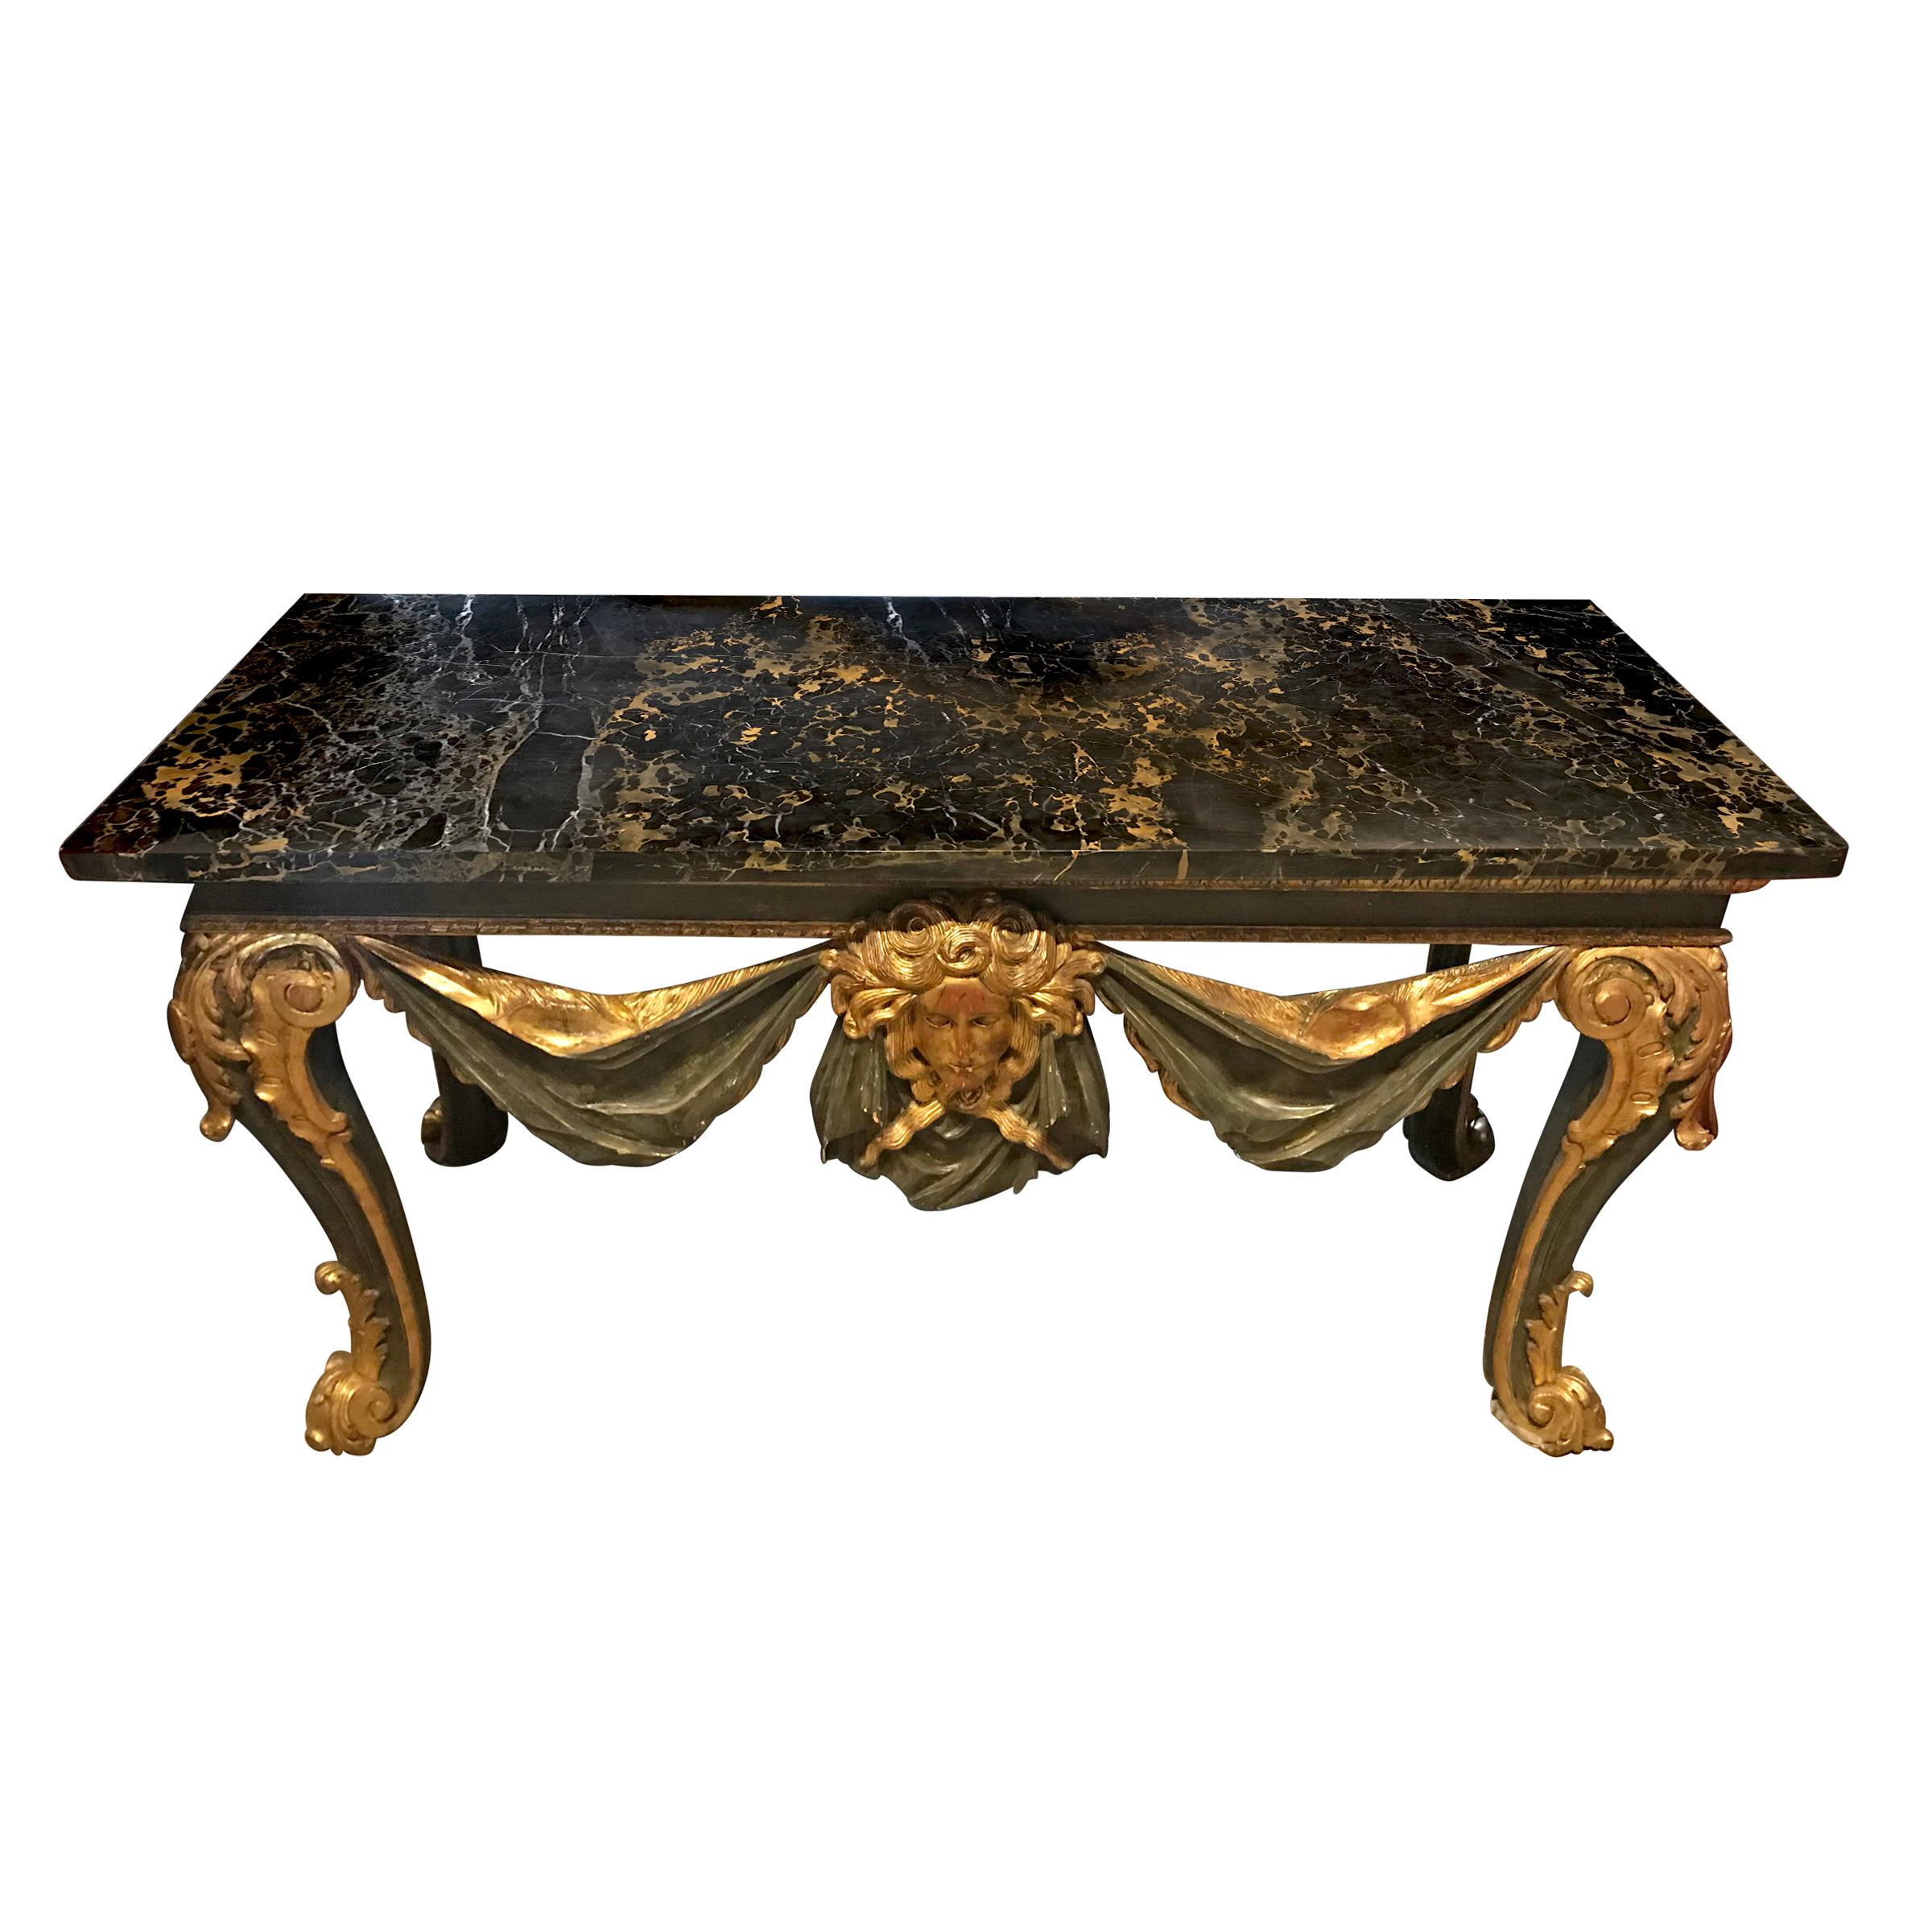 A grand 19th century Italian marble-top console table with an apron carved of wood to mimic a swaged cloth and large classical face in the centre, all painted a wonderful museum olive green with water gilt accents. The top is one large piece of Nero